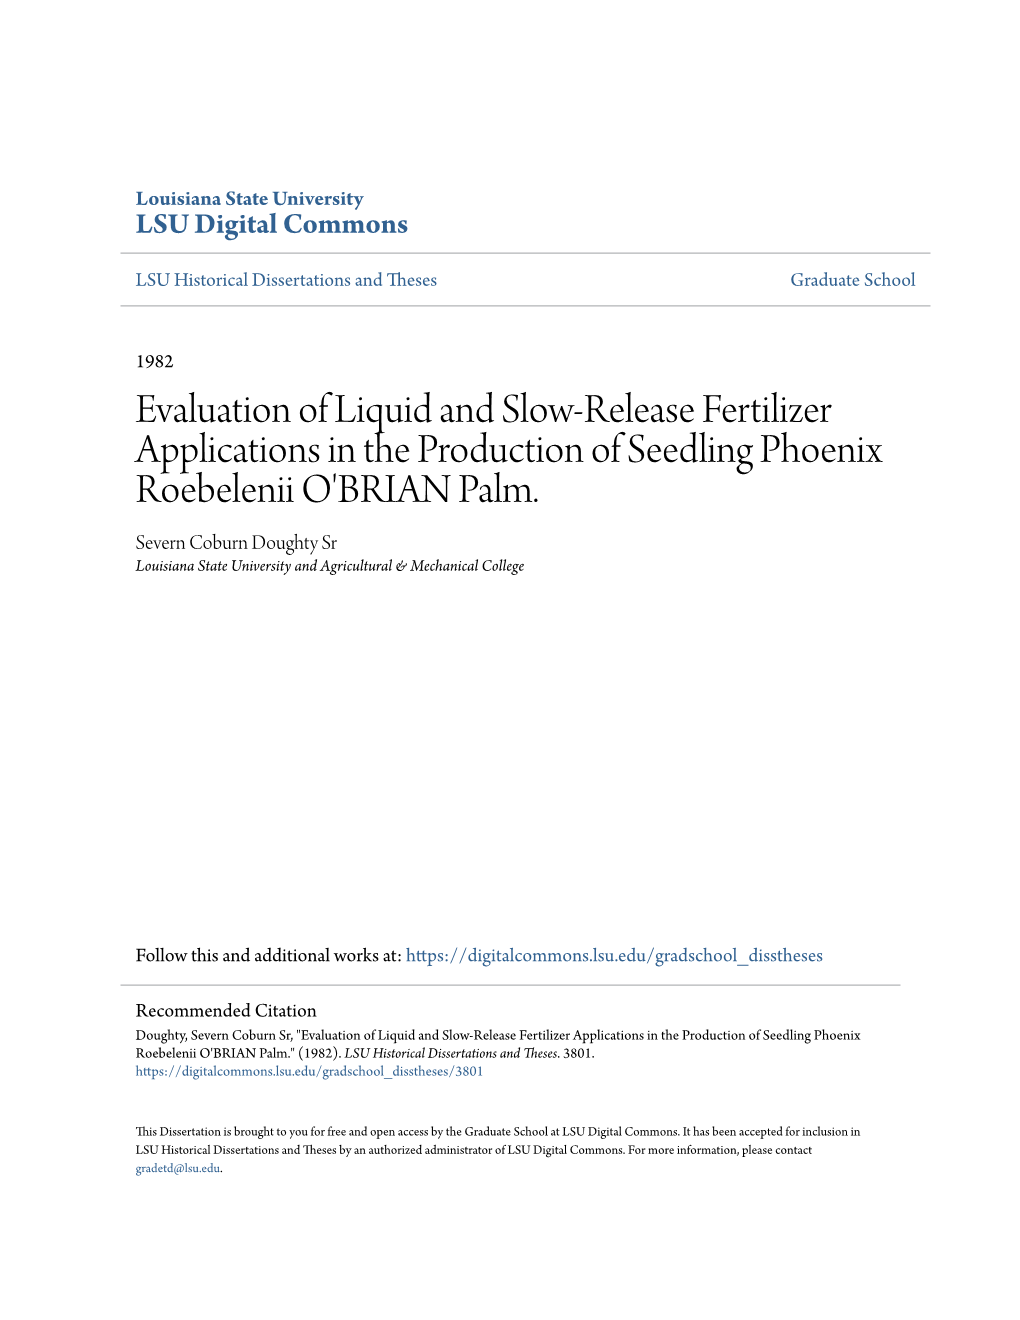 Evaluation of Liquid and Slow-Release Fertilizer Applications in the Production of Seedling Phoenix Roebelenii O'brian Palm